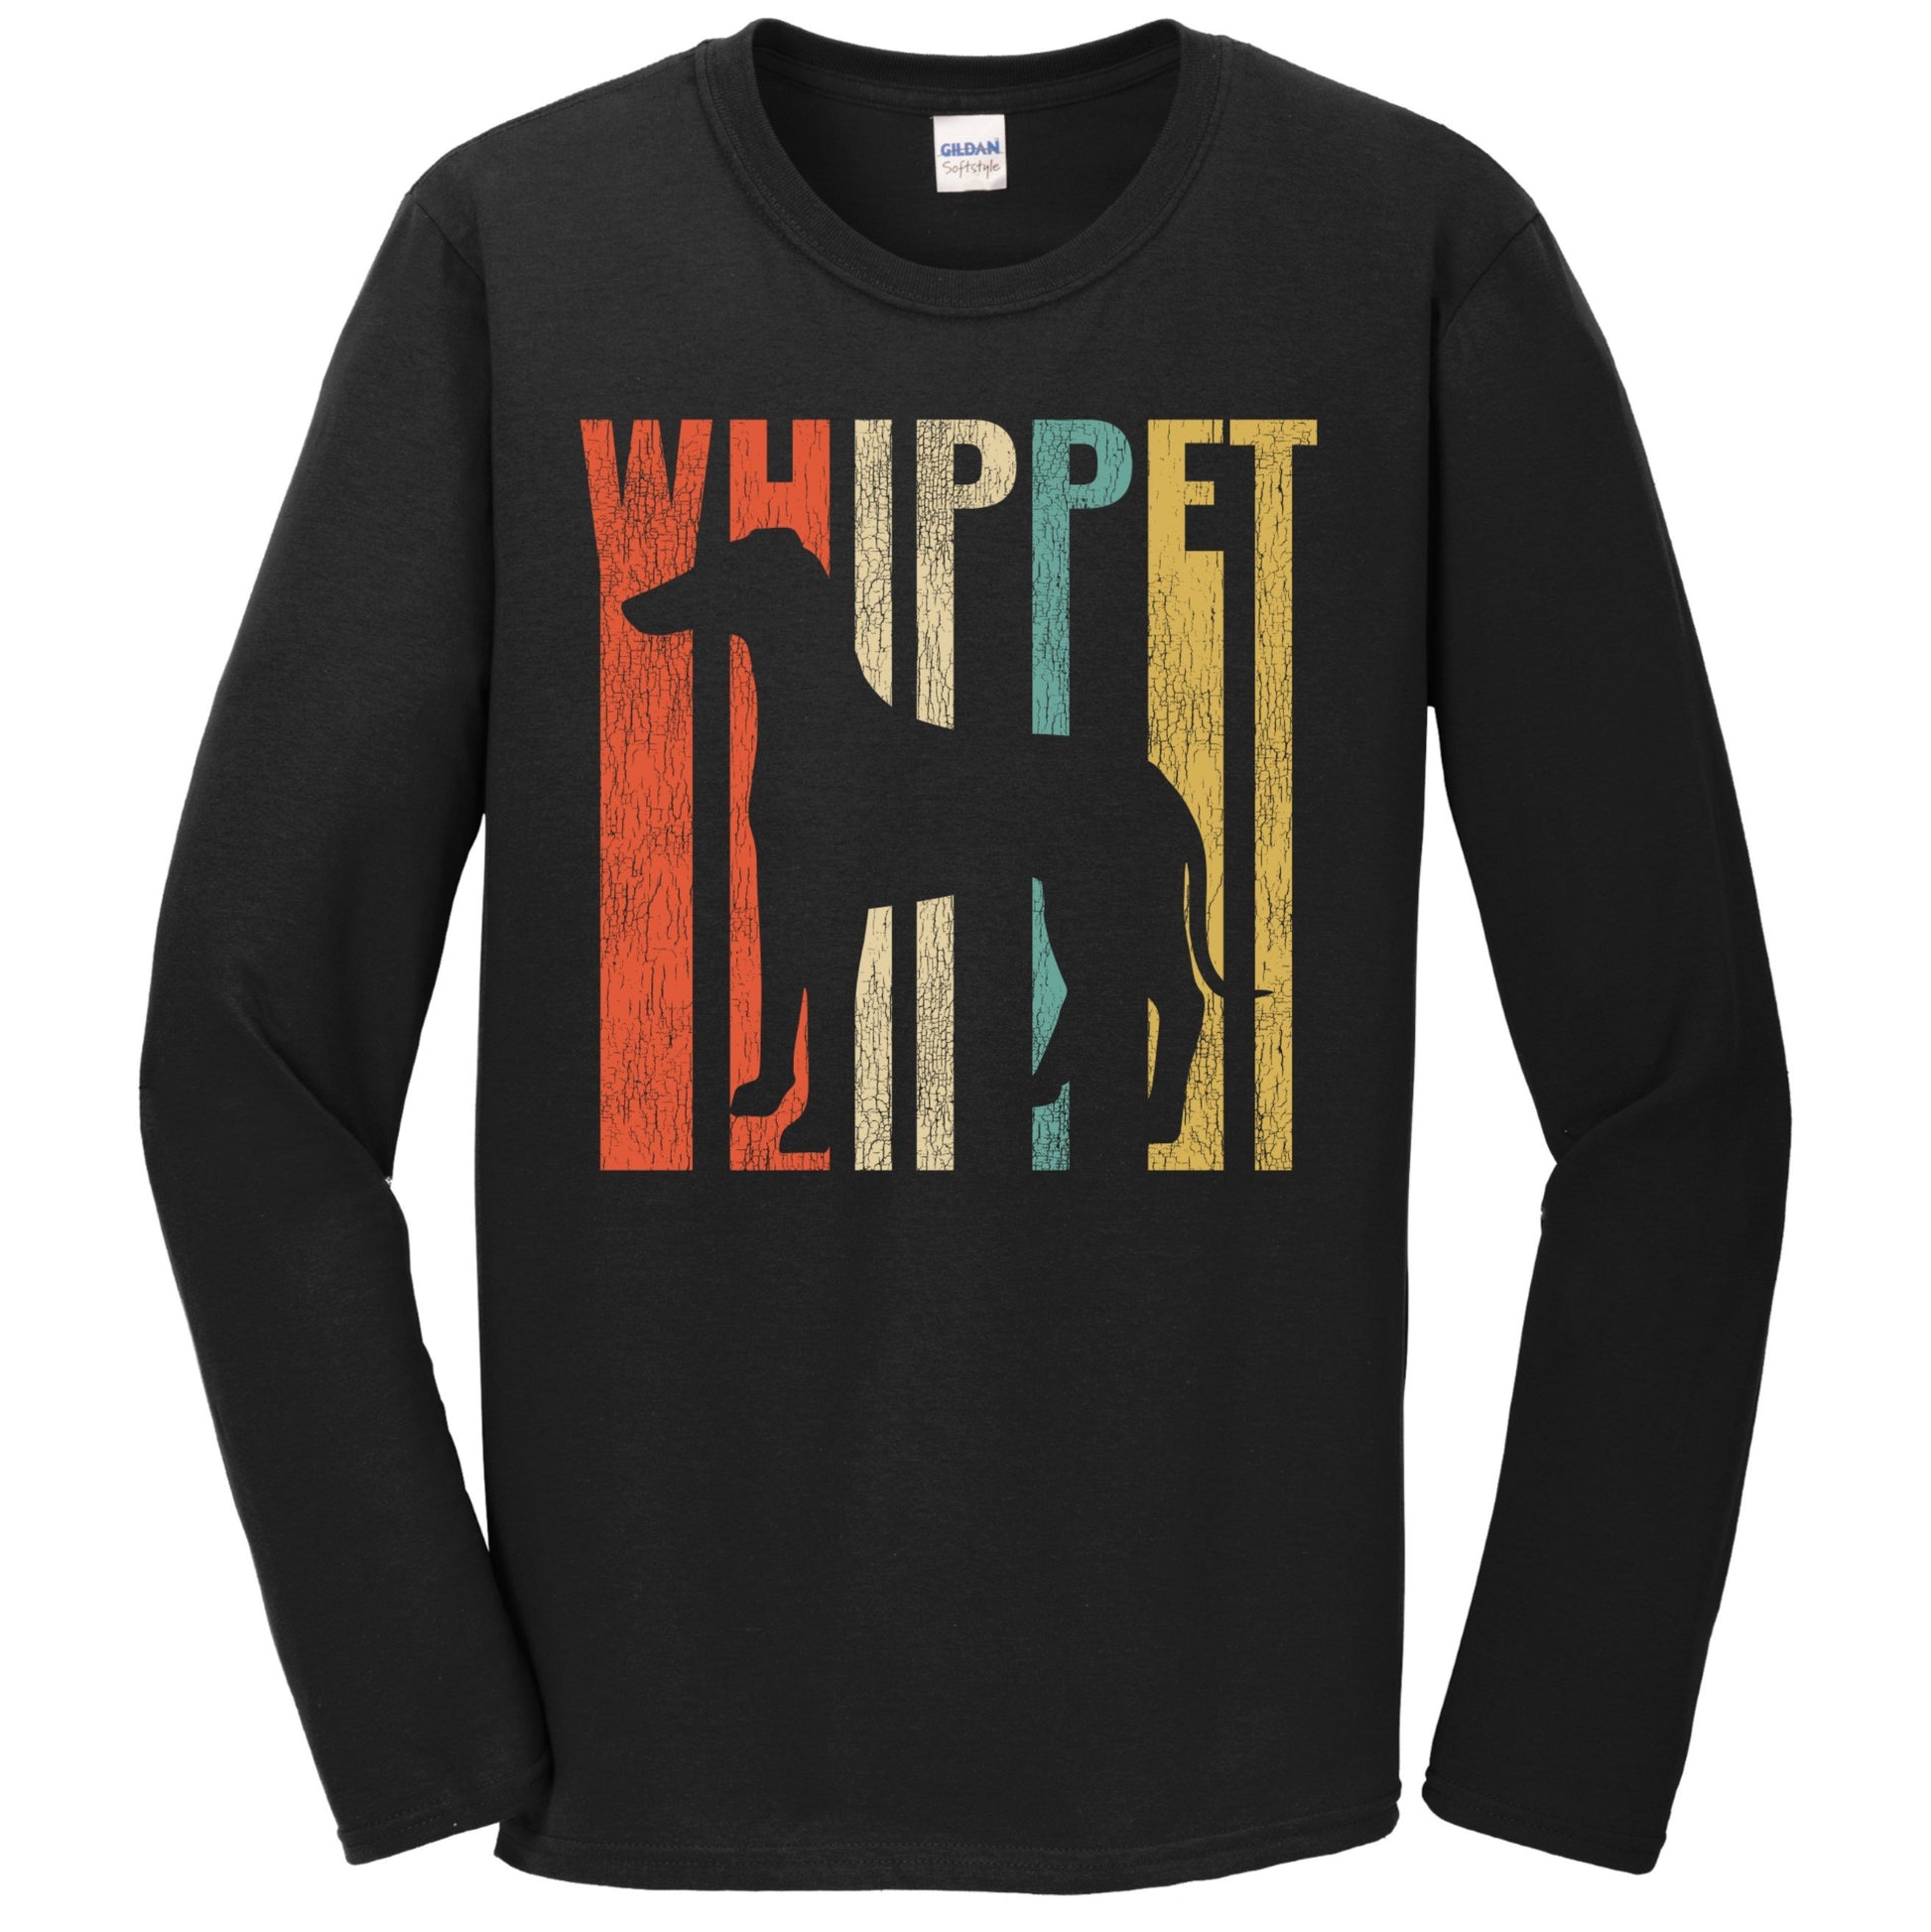 Retro 1970's Style Whippet Dog Silhouette Cracked Distressed Long Sleeve T-Shirt